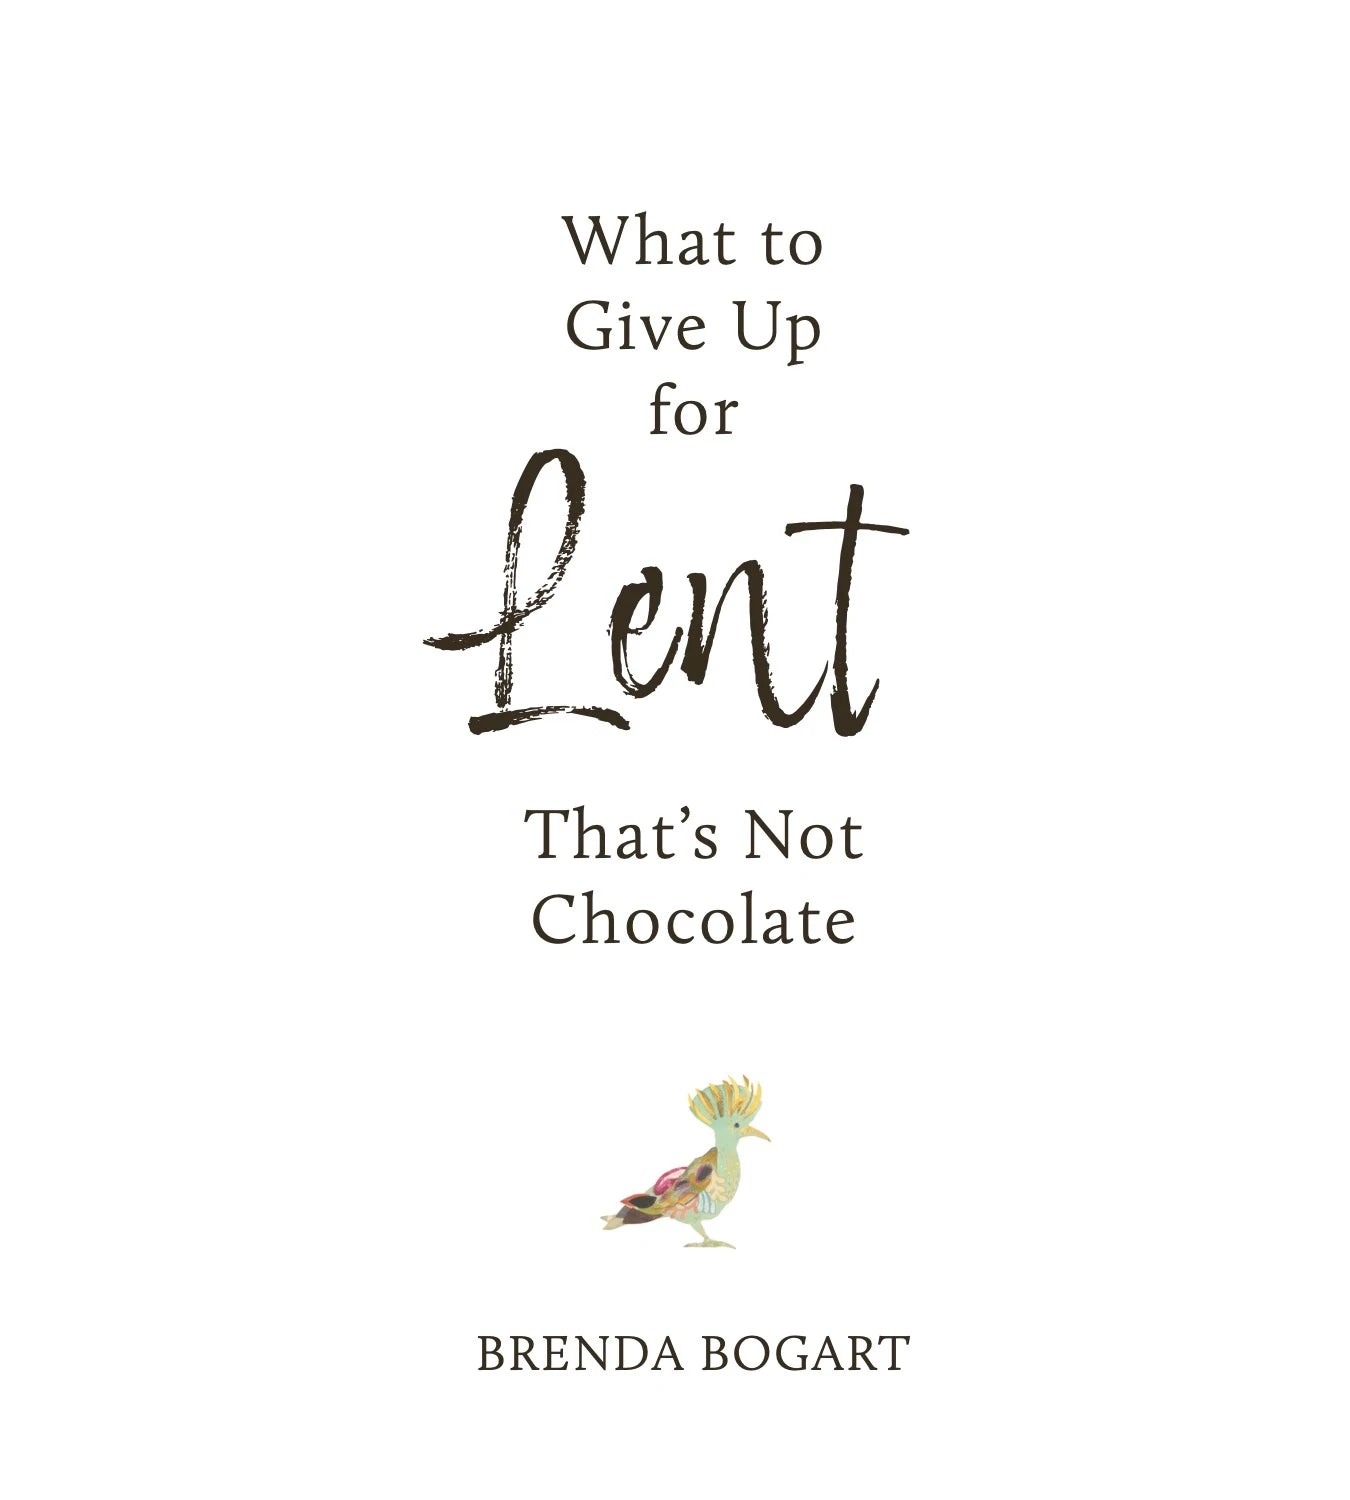 'What to Give Up for Lent That's Not Chocolate' by Brenda Bogart